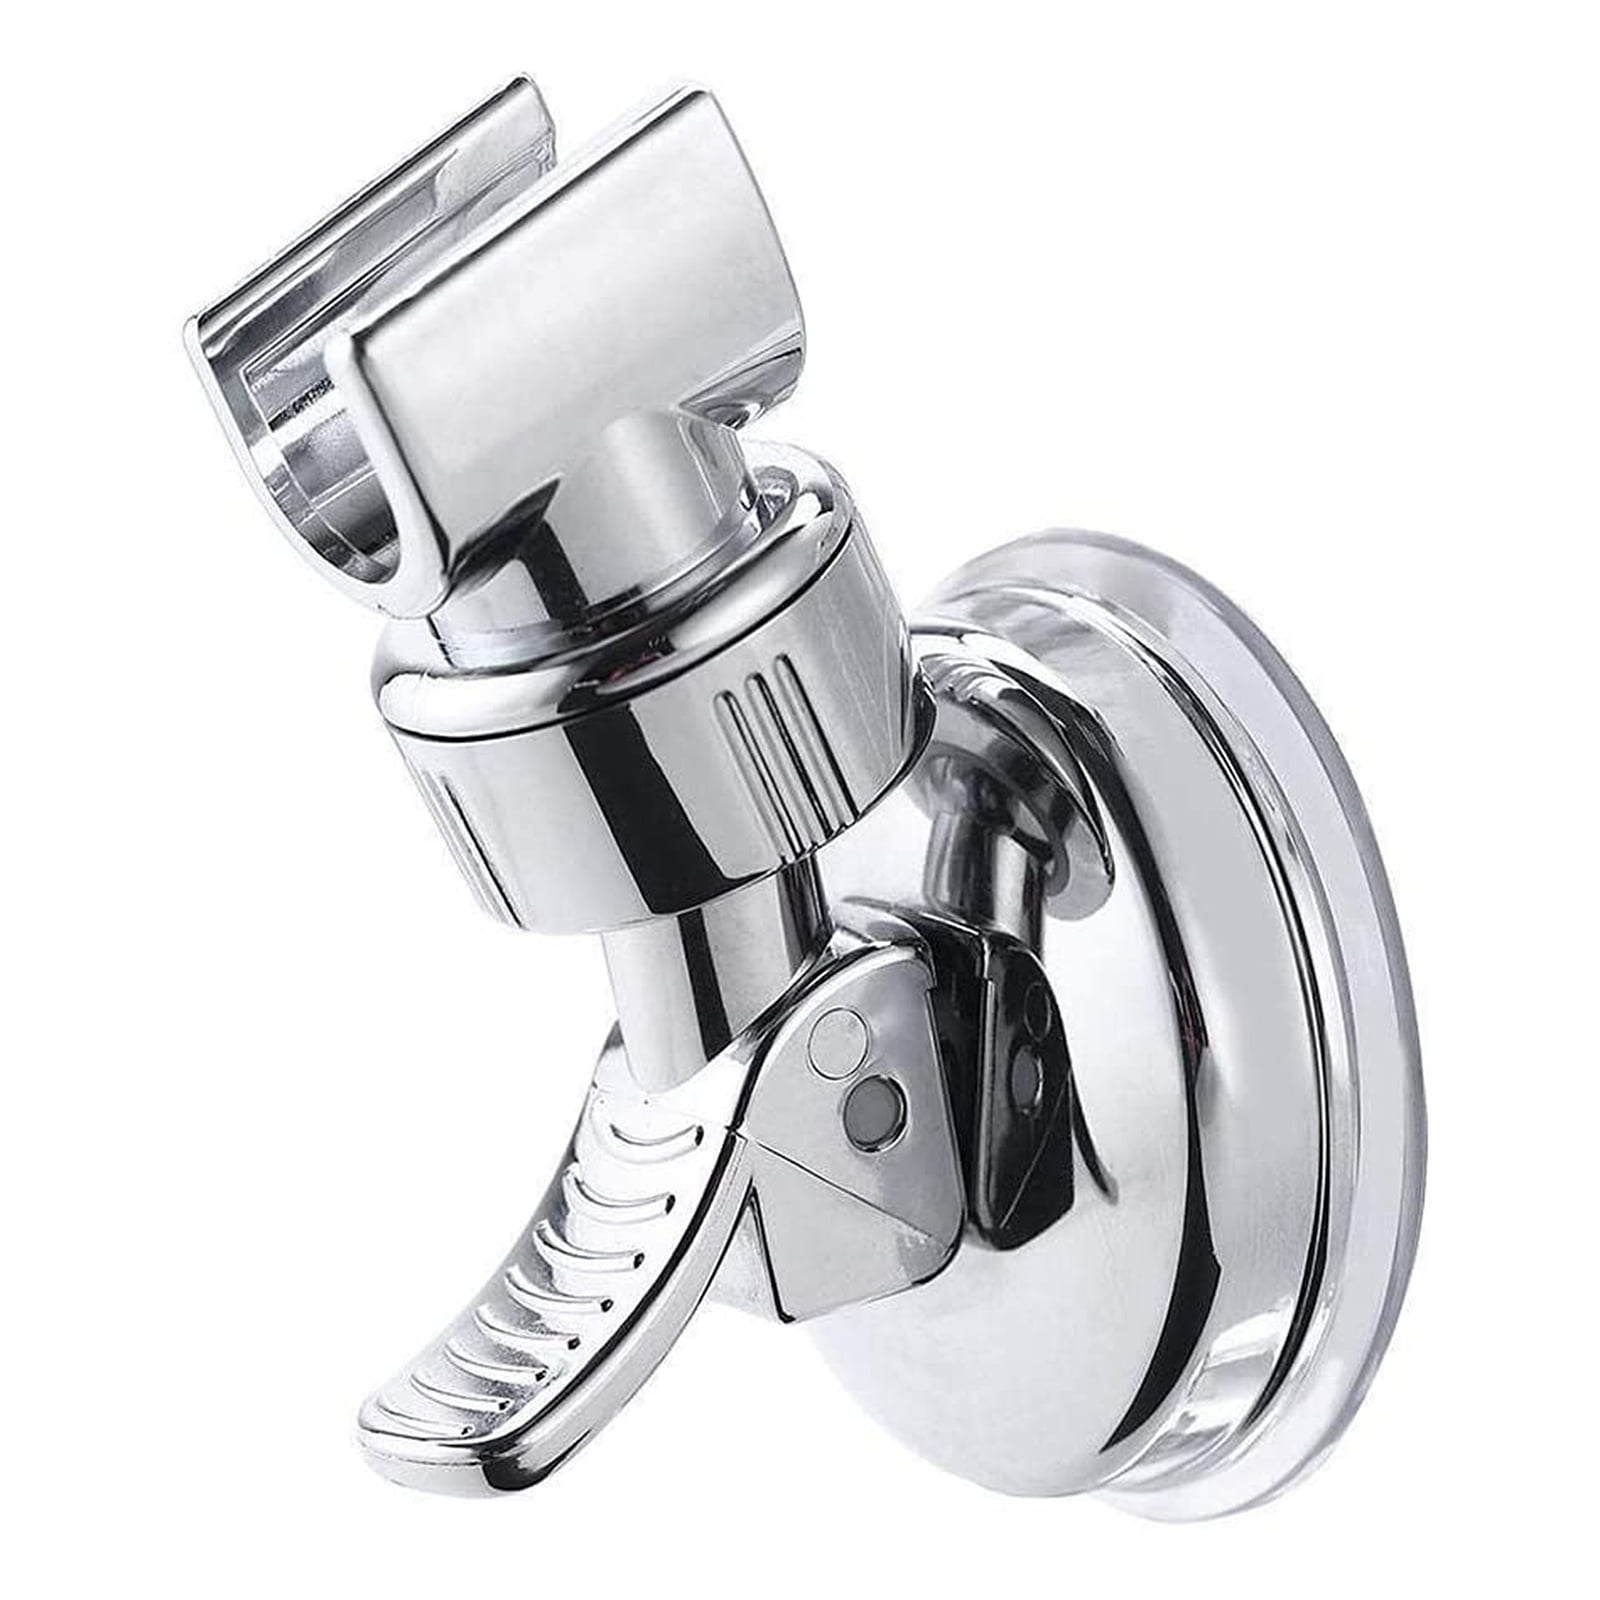 Attachable Handheld Shower Spray Head Holder Bracket Wall Mount Suction Cup, 